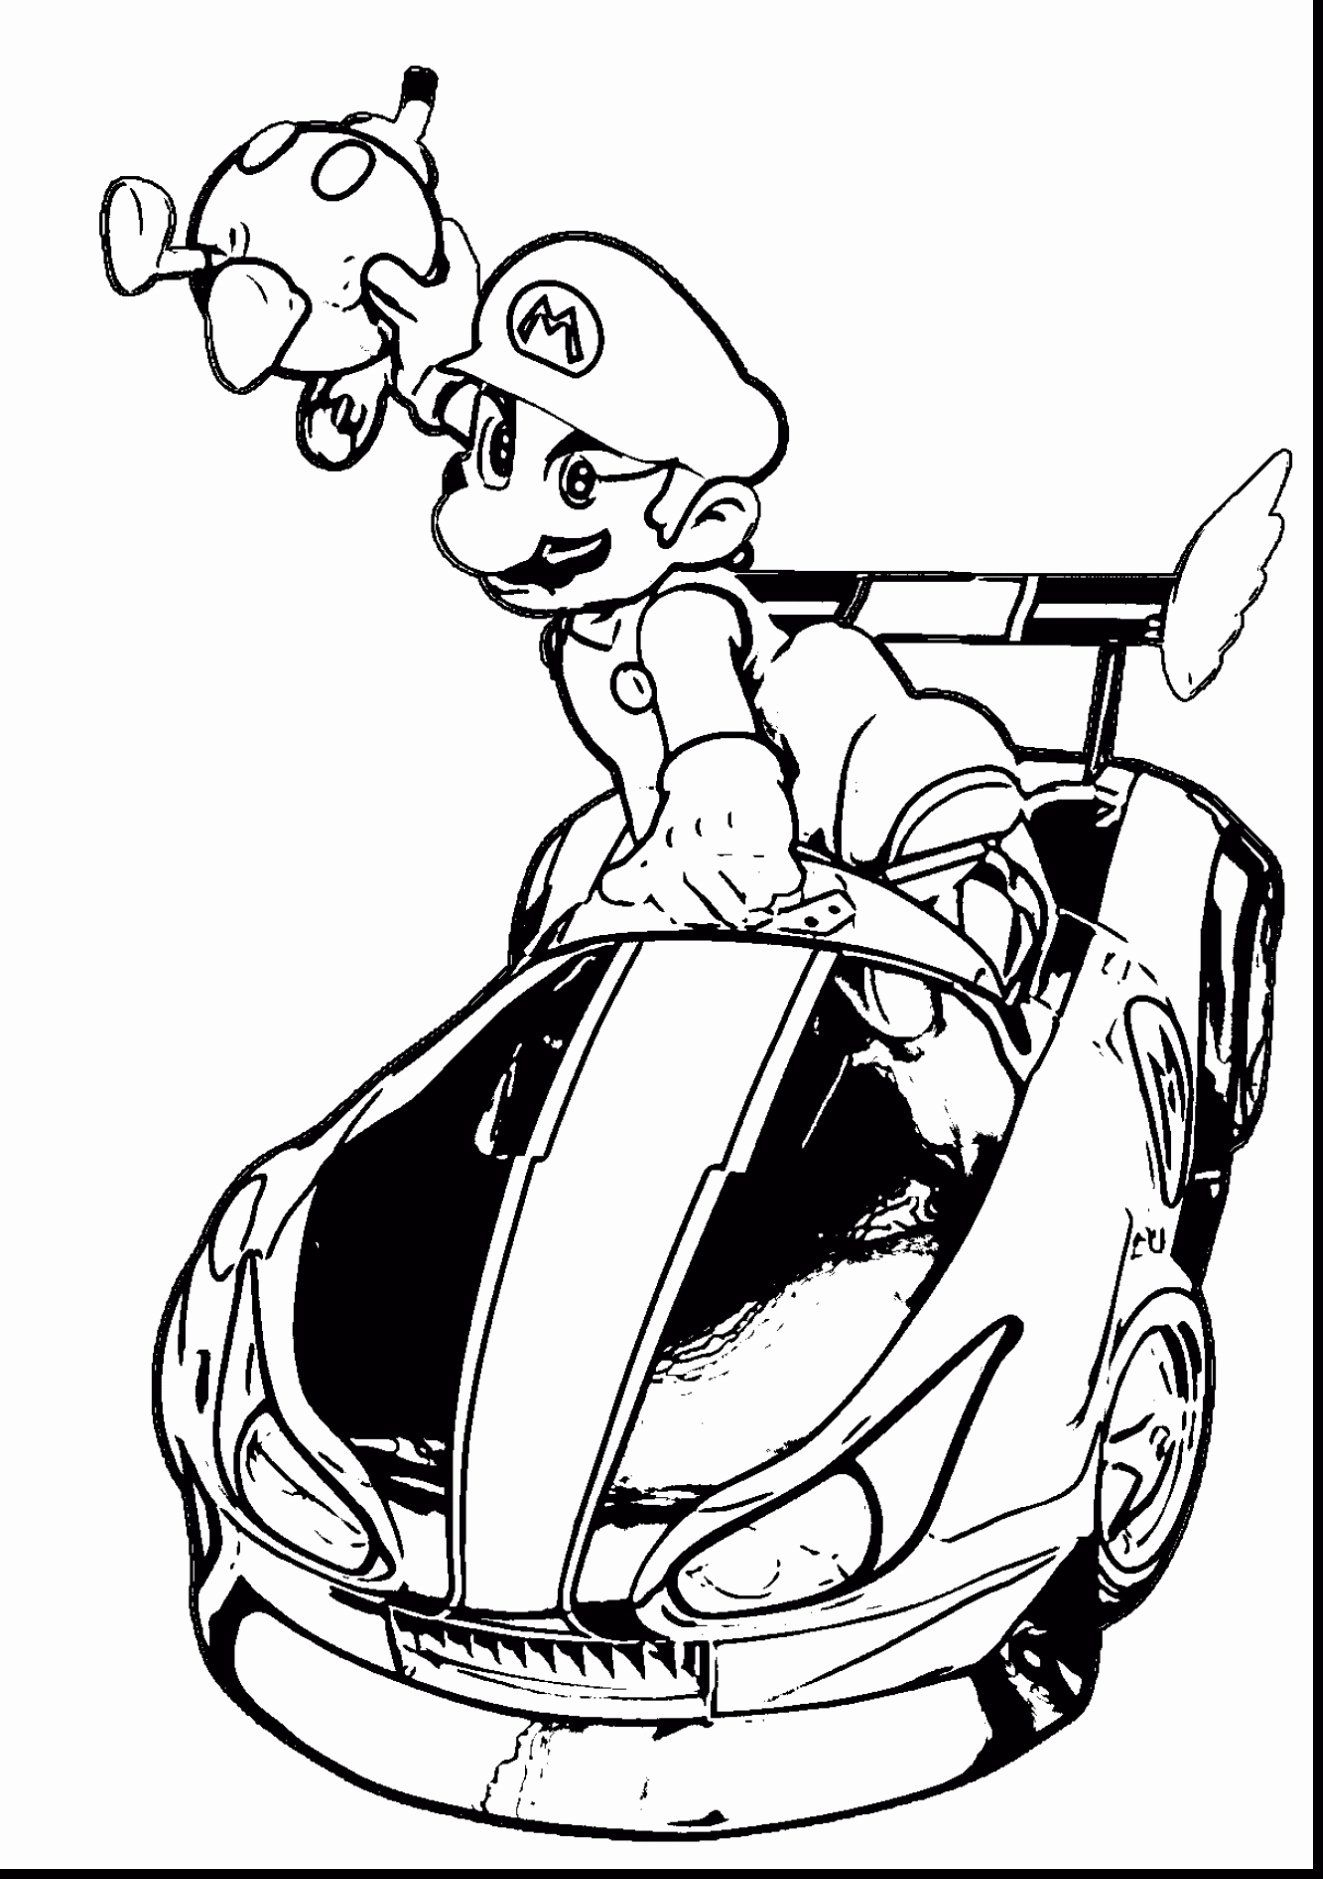 ️Mario Kart 8 Coloring Pages Free Download| Gmbar.co à Coloriages Mario Kart